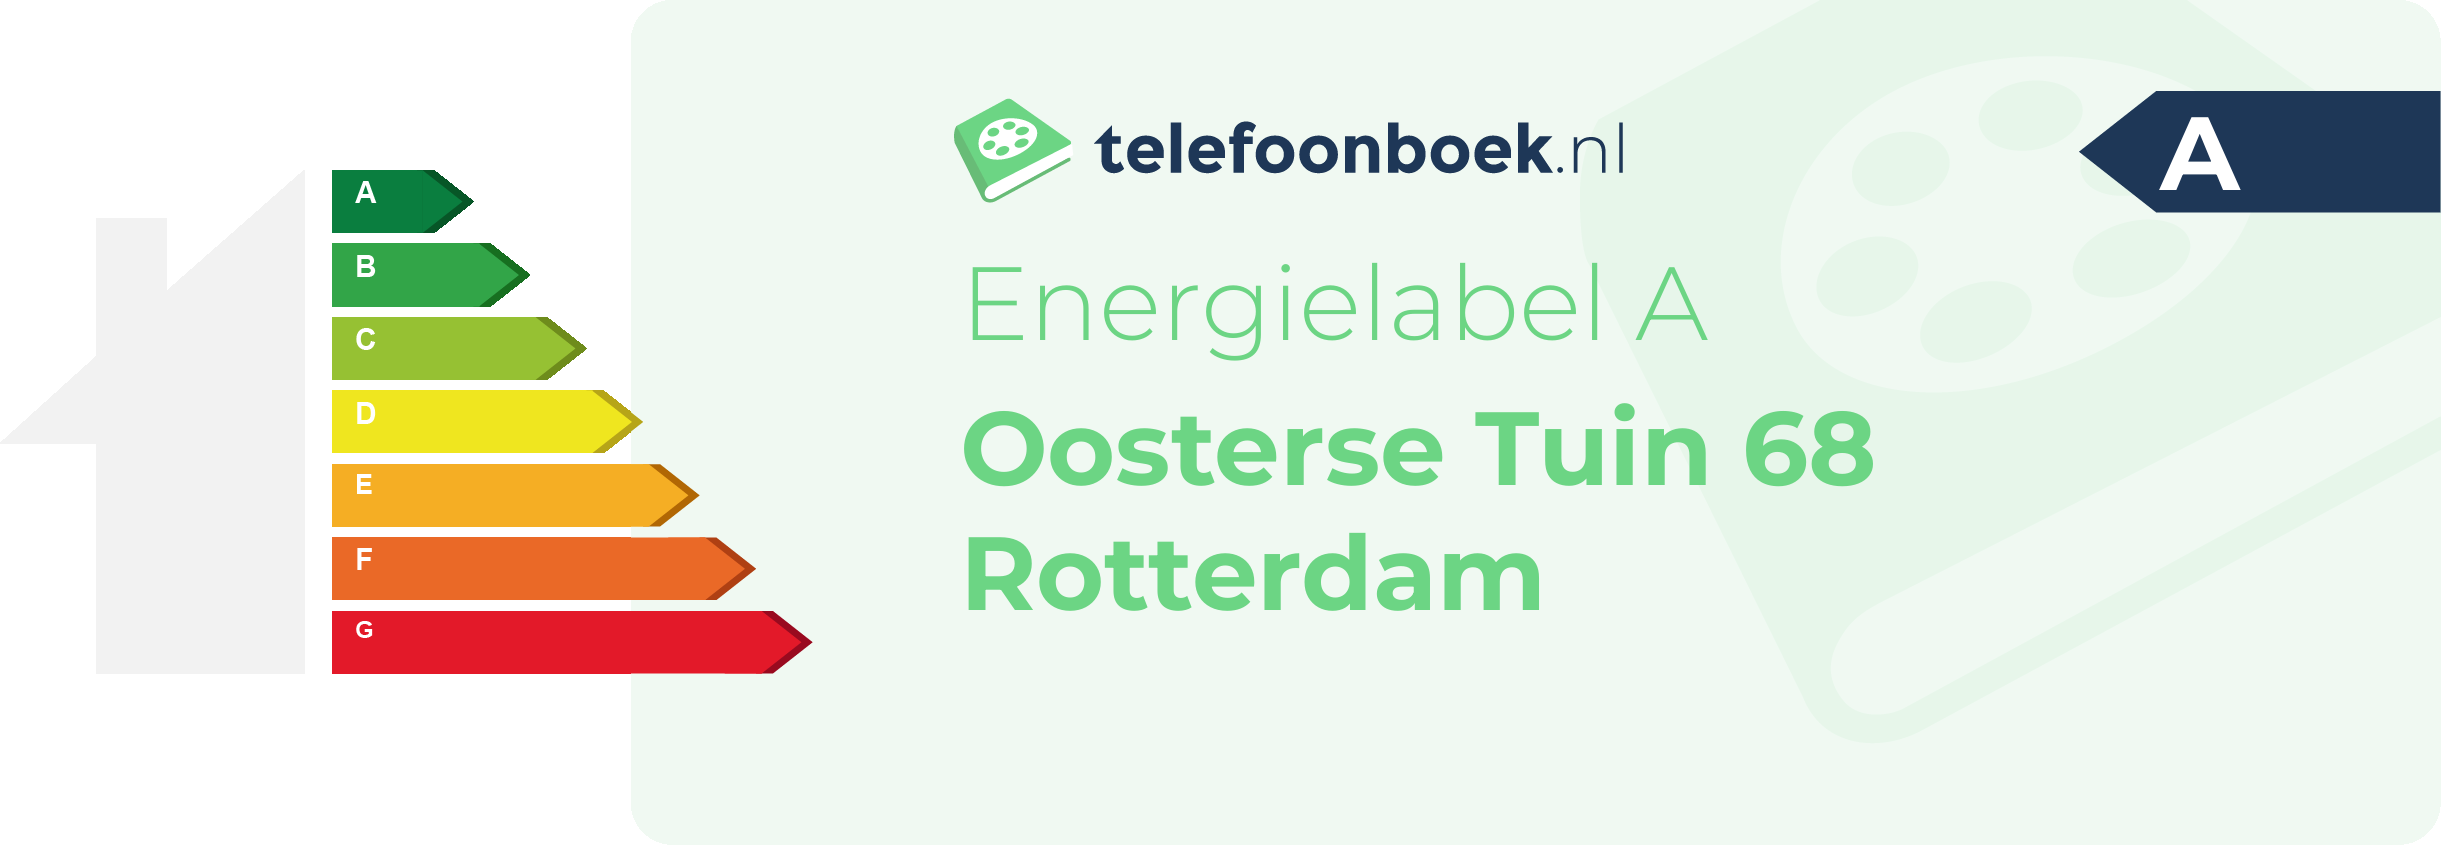 Energielabel Oosterse Tuin 68 Rotterdam